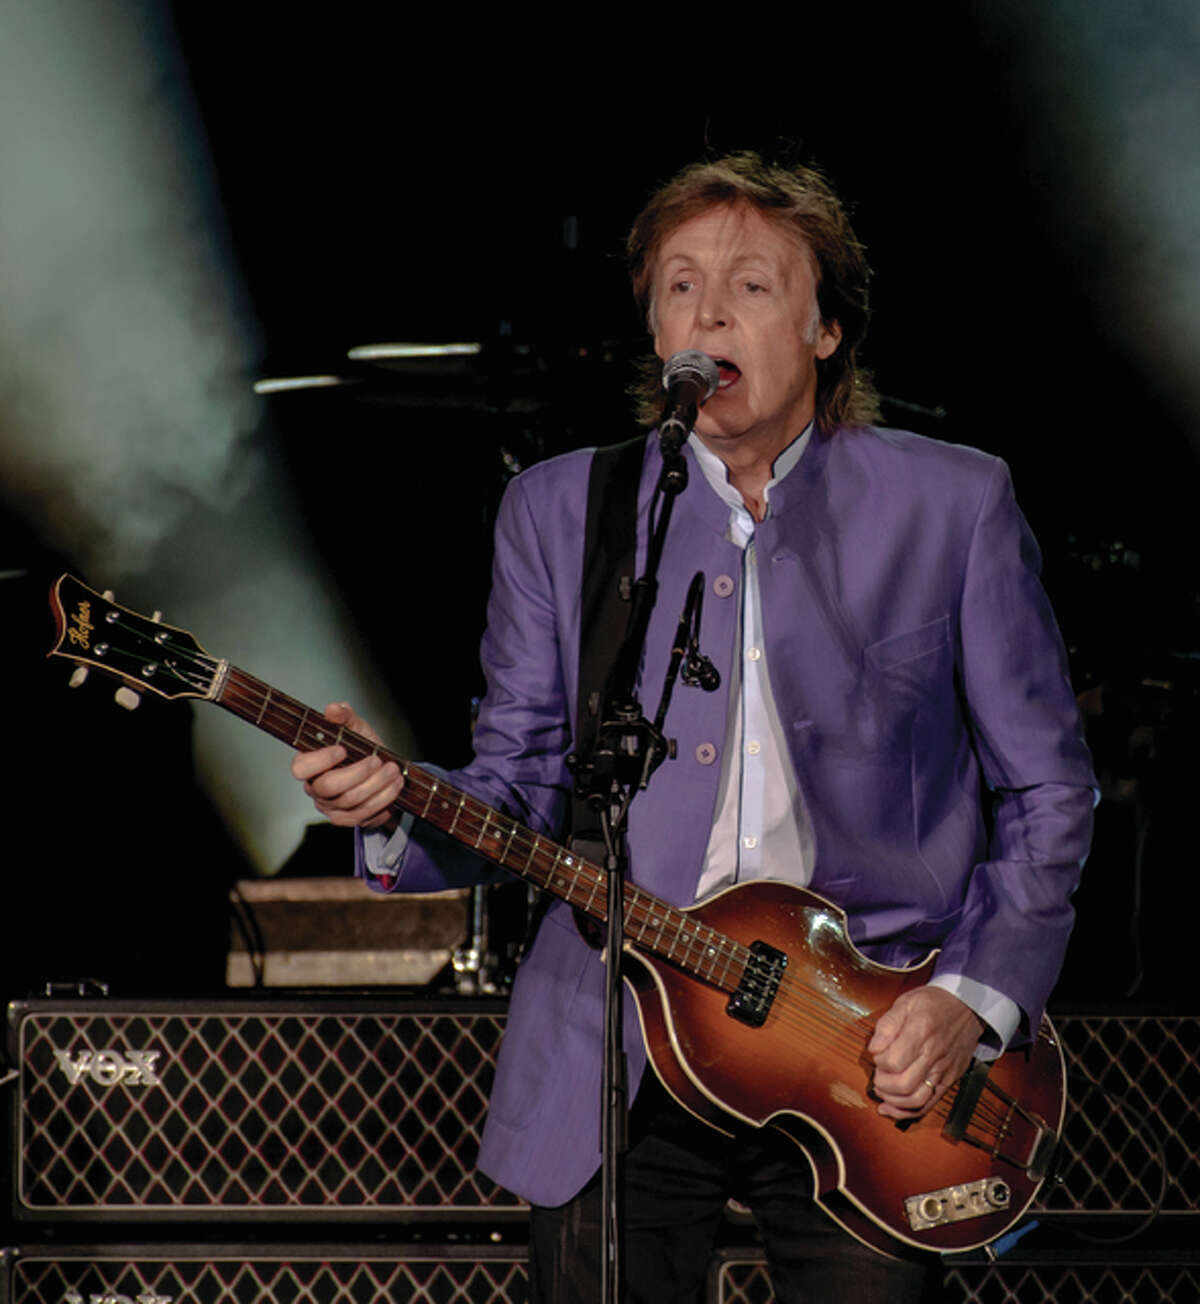 Music icon Paul McCartney brought his One on One Tour to a sold-out Busch Stadium Saturday, Aug. 13, for a night that simultaneously filled the stadium with fond memories while creating new ones, as well.